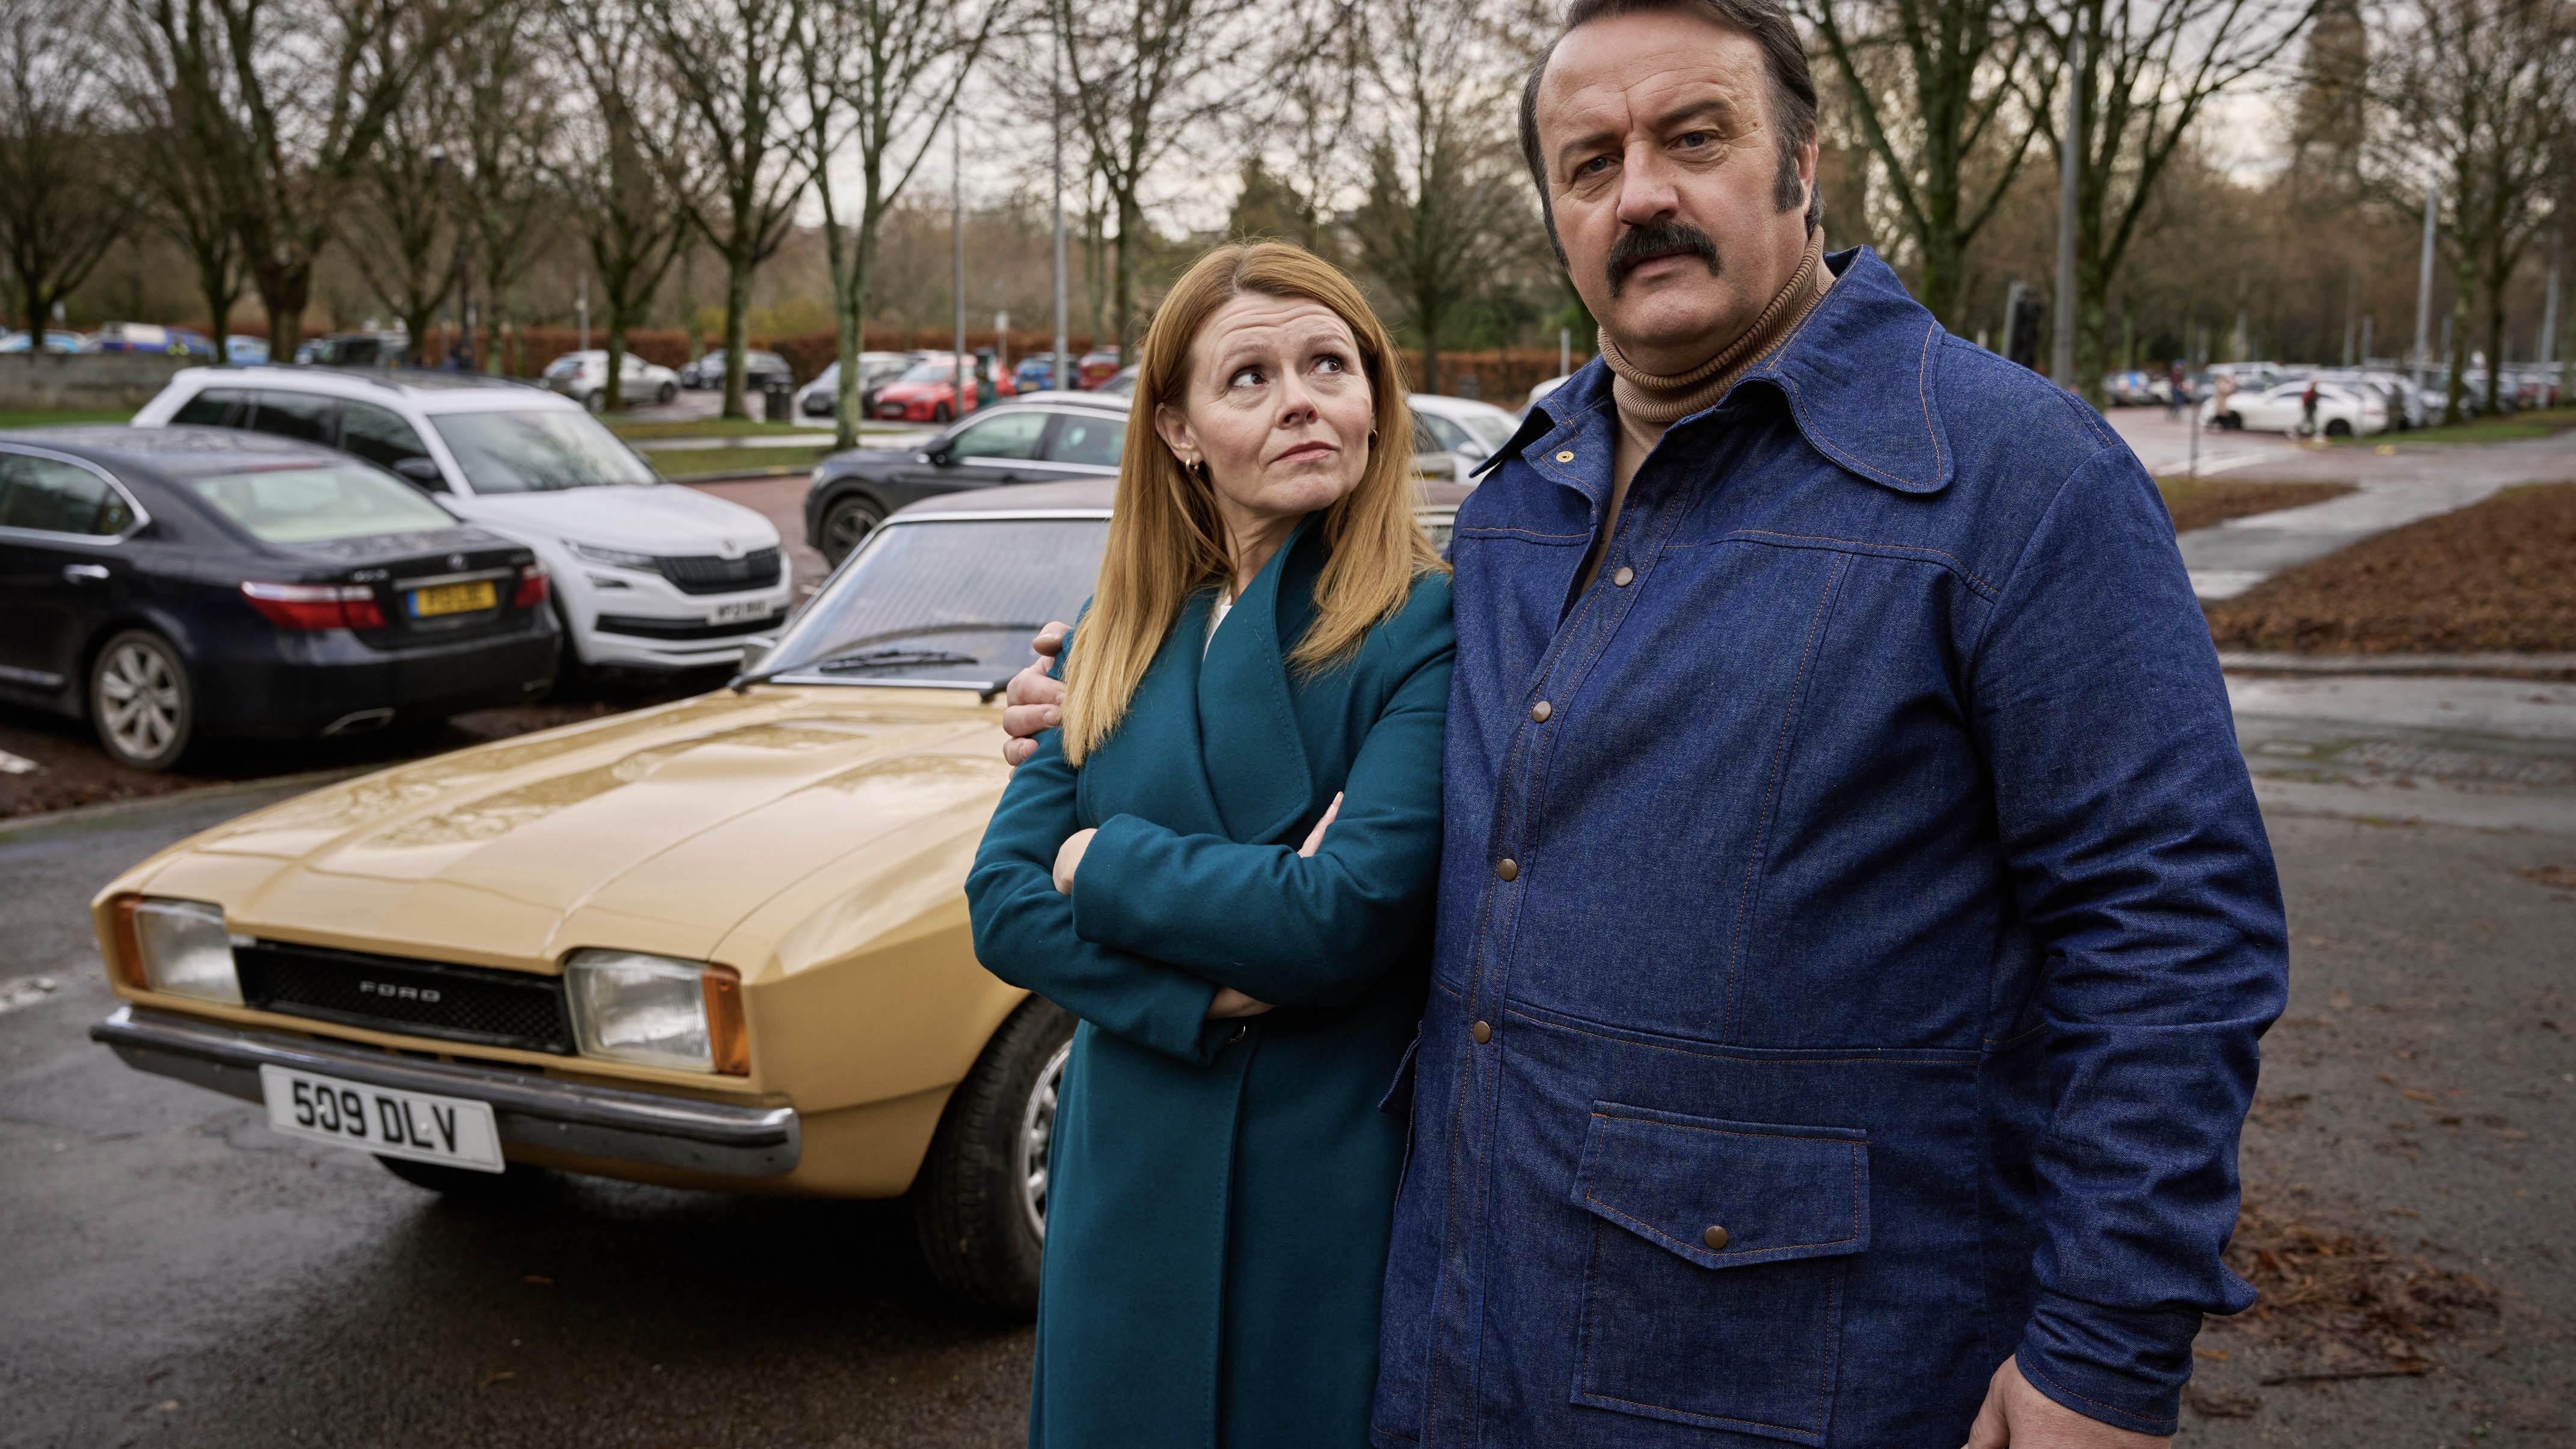 Sian Gibson in a green coat as Mel stands next to Mike Bubbins in a denim jacket as Tony Mammoth alongside a beige Ford in Mammoth.